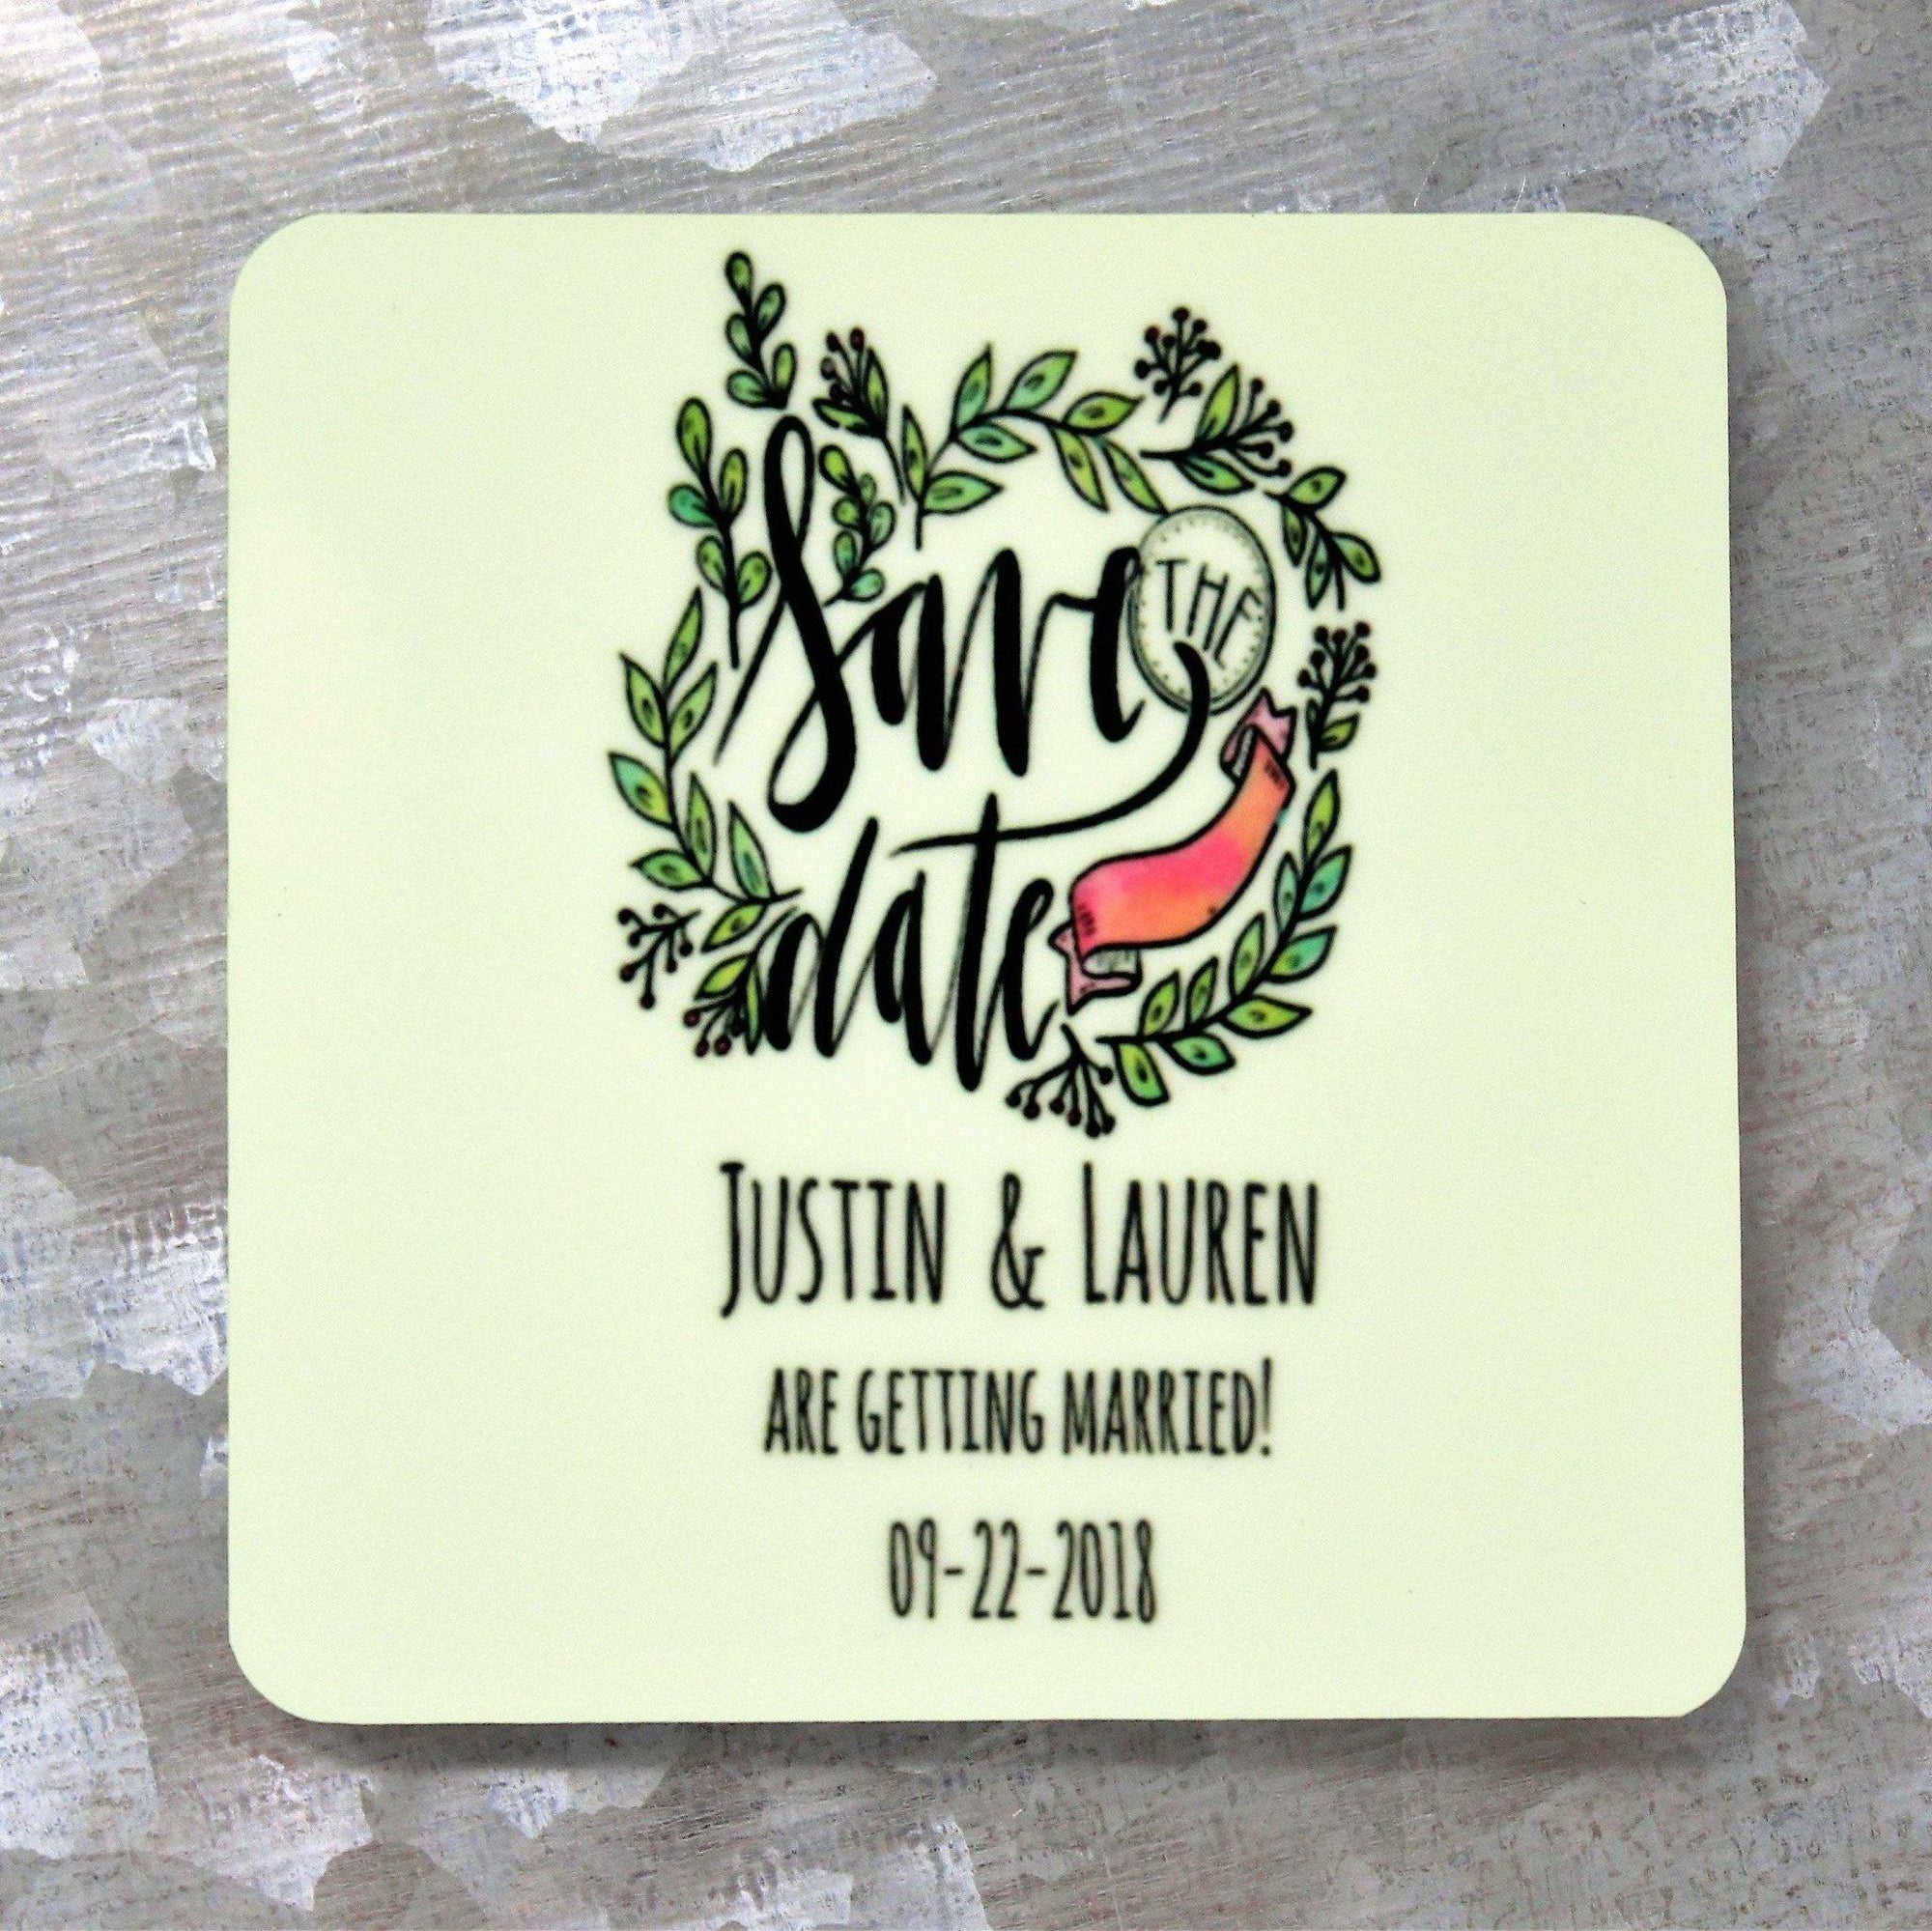 Personalized Magnet | Custom Photo Magnet | Wedding Green - This & That Solutions - Personalized Magnet | Custom Photo Magnet | Wedding Green - Personalized Gifts & Custom Home Decor